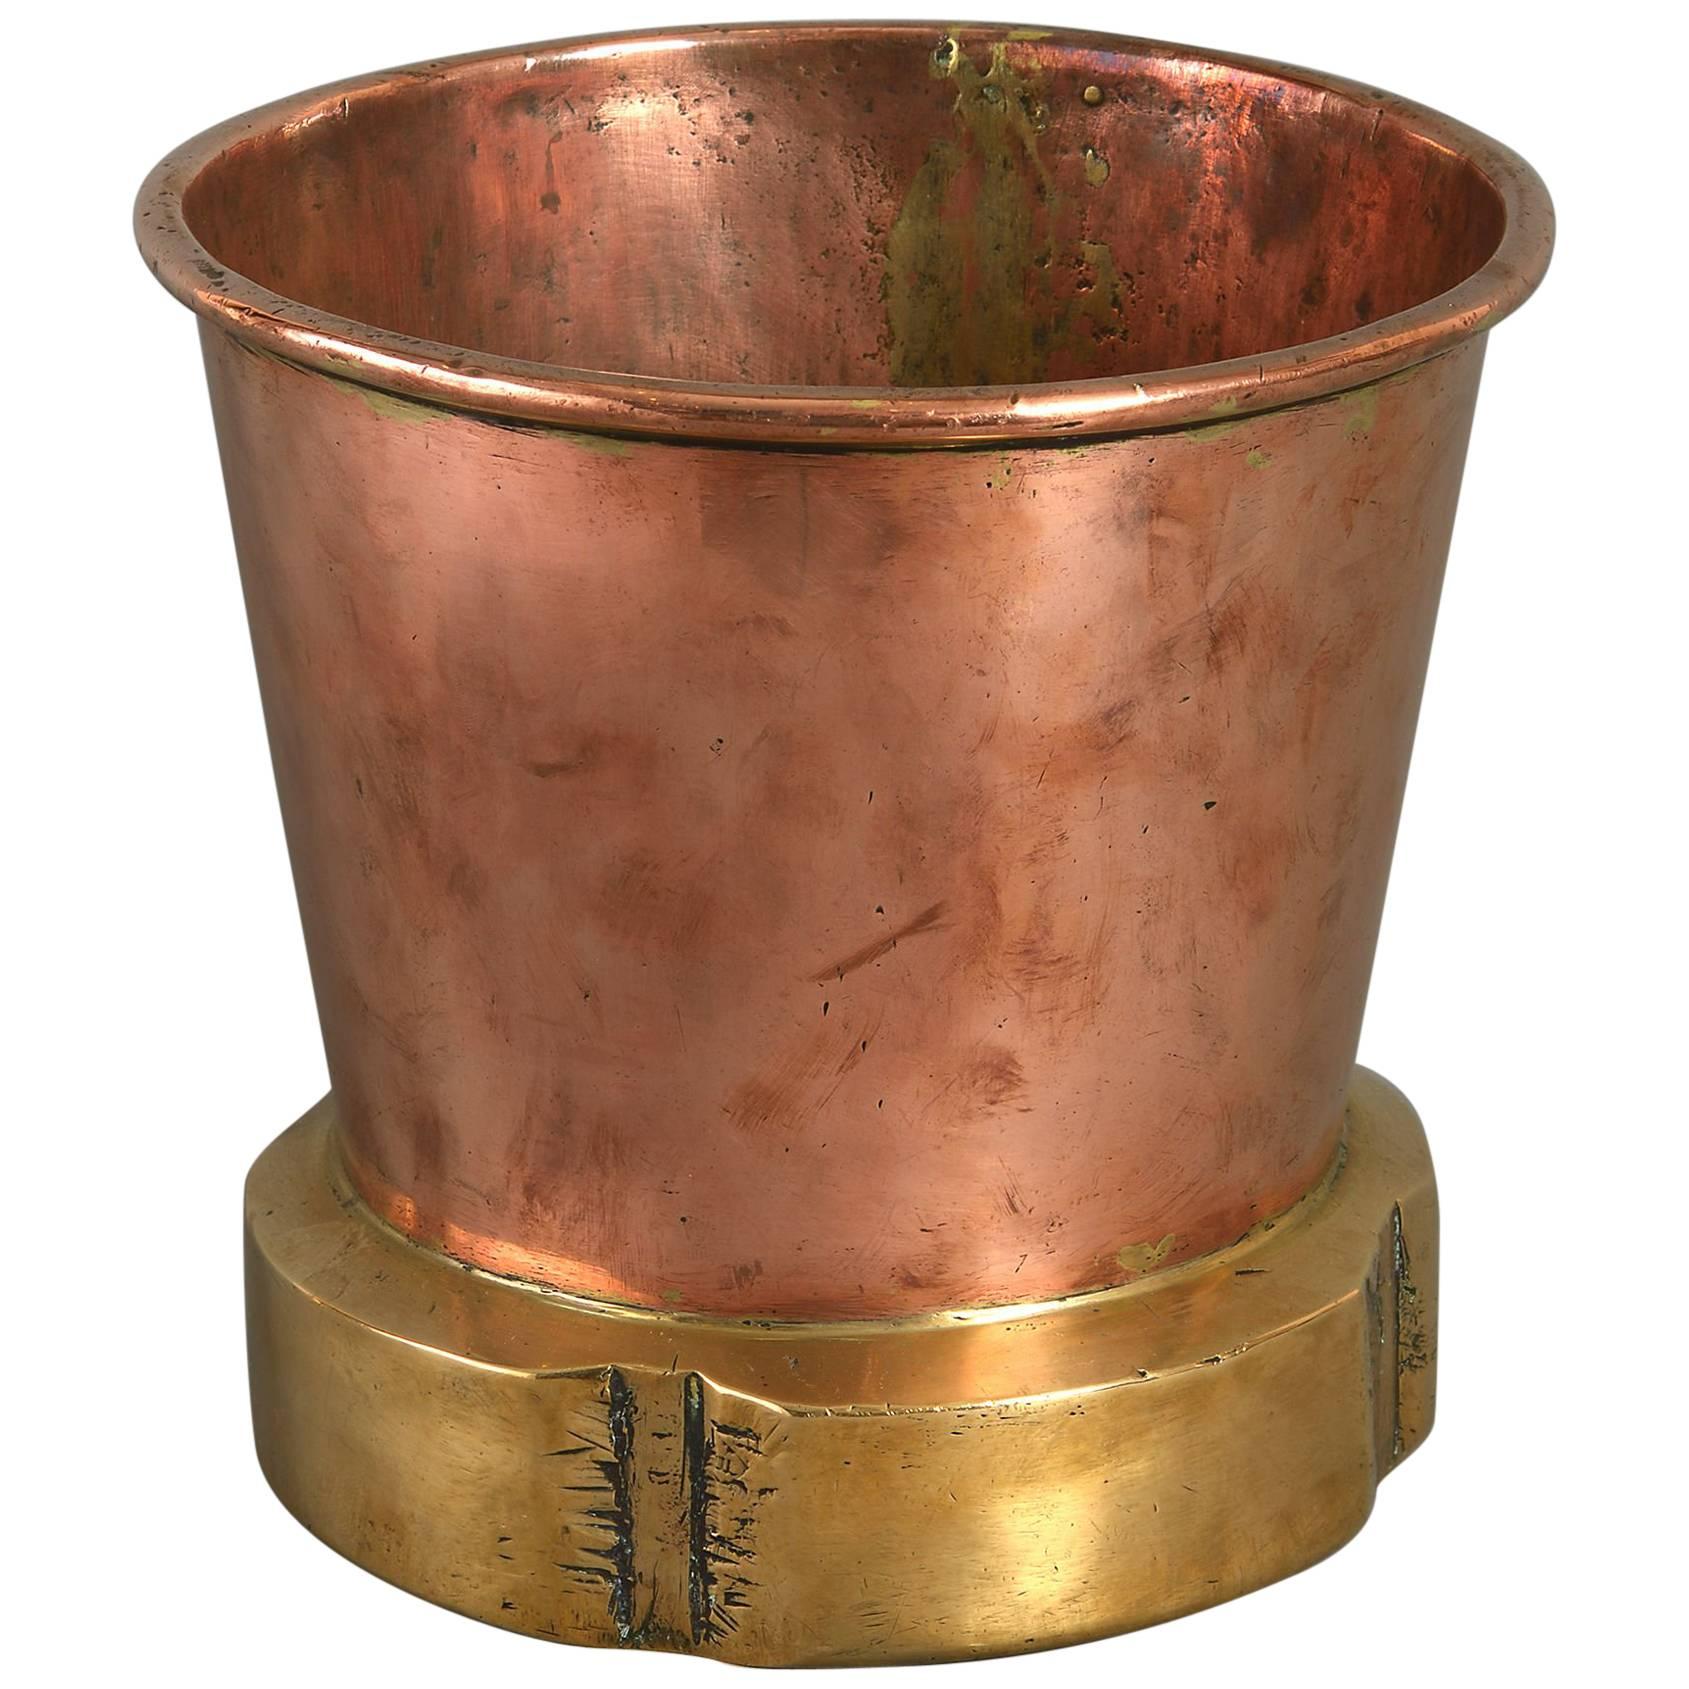 19th Century Victorian Period Brass and Copper Cooler or Planter